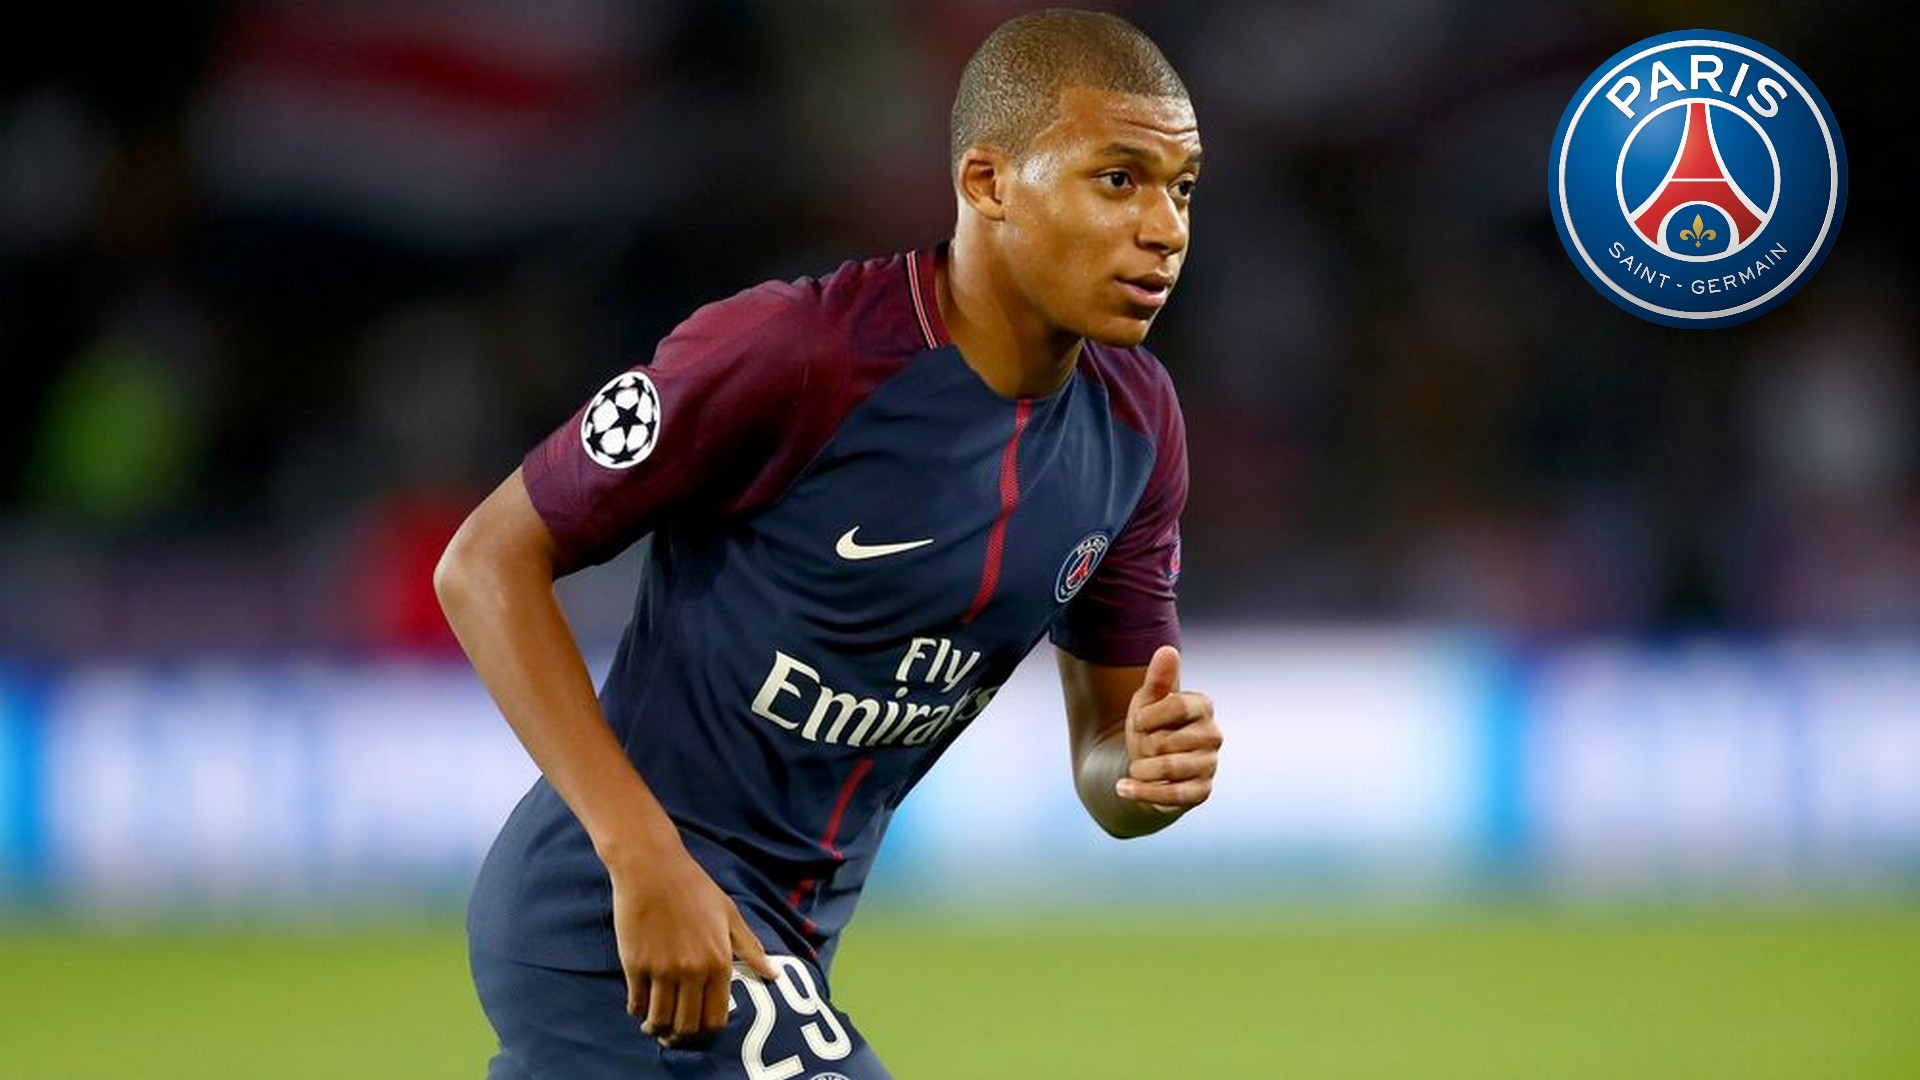 Wallpapers HD Mbappe Paris Saint-Germain with resolution 1920x1080 pixel. You can make this wallpaper for your Mac or Windows Desktop Background, iPhone, Android or Tablet and another Smartphone device